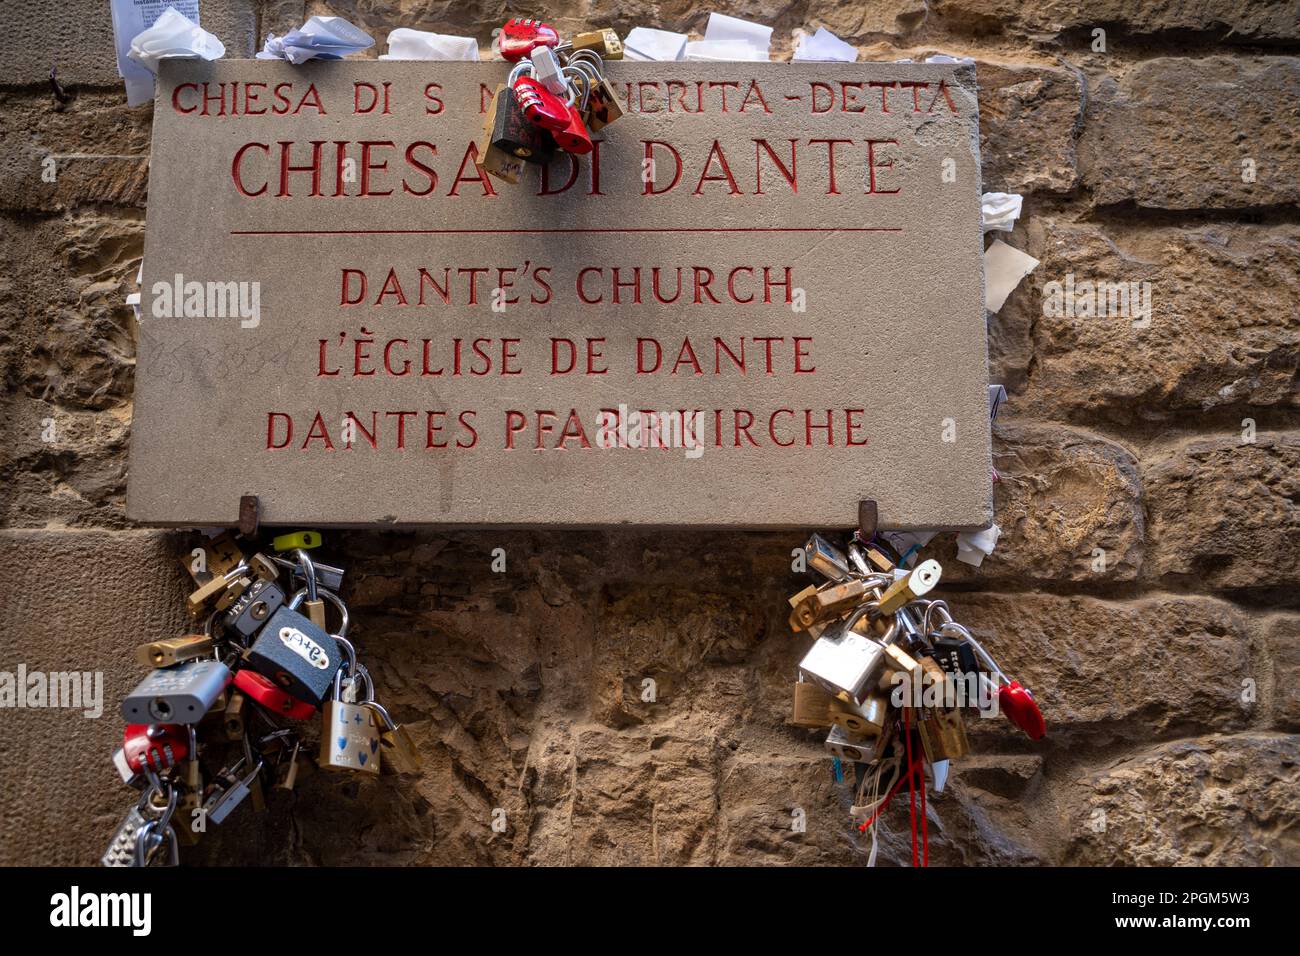 Love locks tied to the sign for Dante's church. Dante Alighieri, author of the Divine Comedy, a Florentine that was sent into exile. Stock Photo